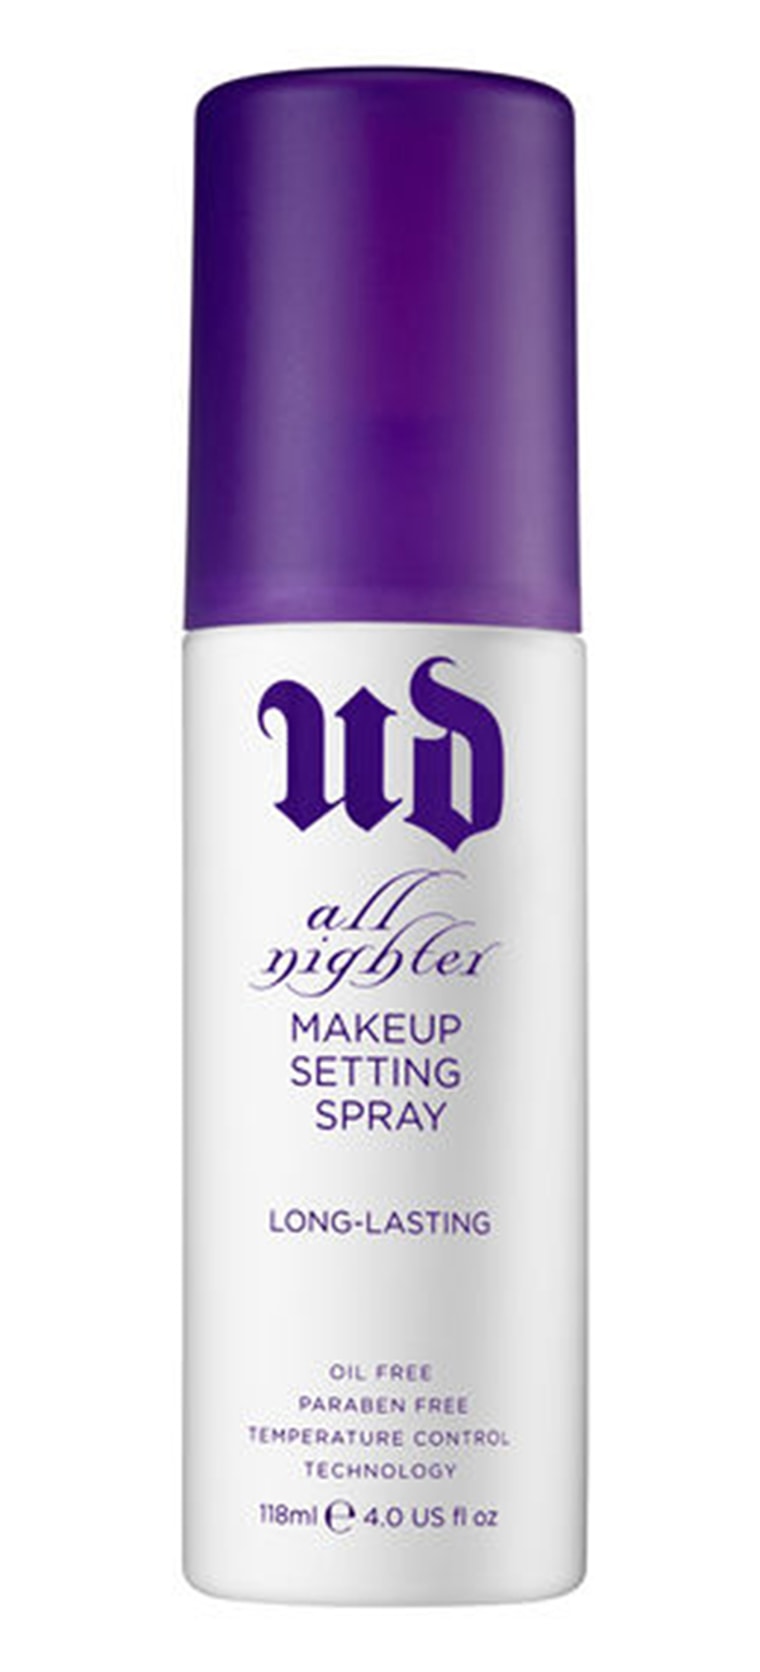 Urban Decay's All Nighter